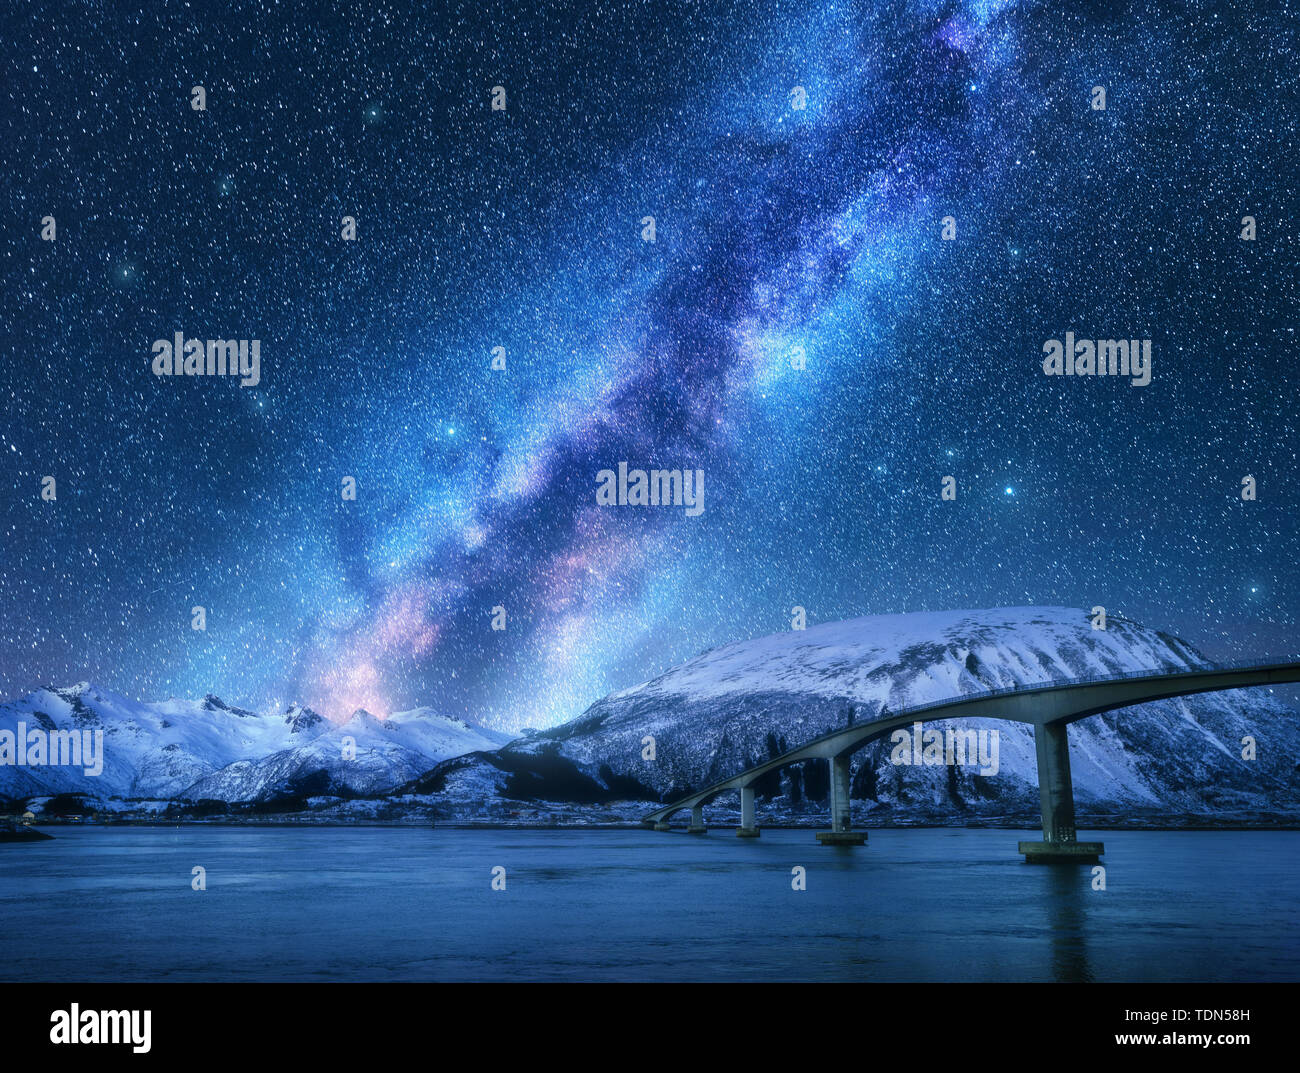 Bridge and starry sky with Milky Way over snow covered mountains Stock Photo